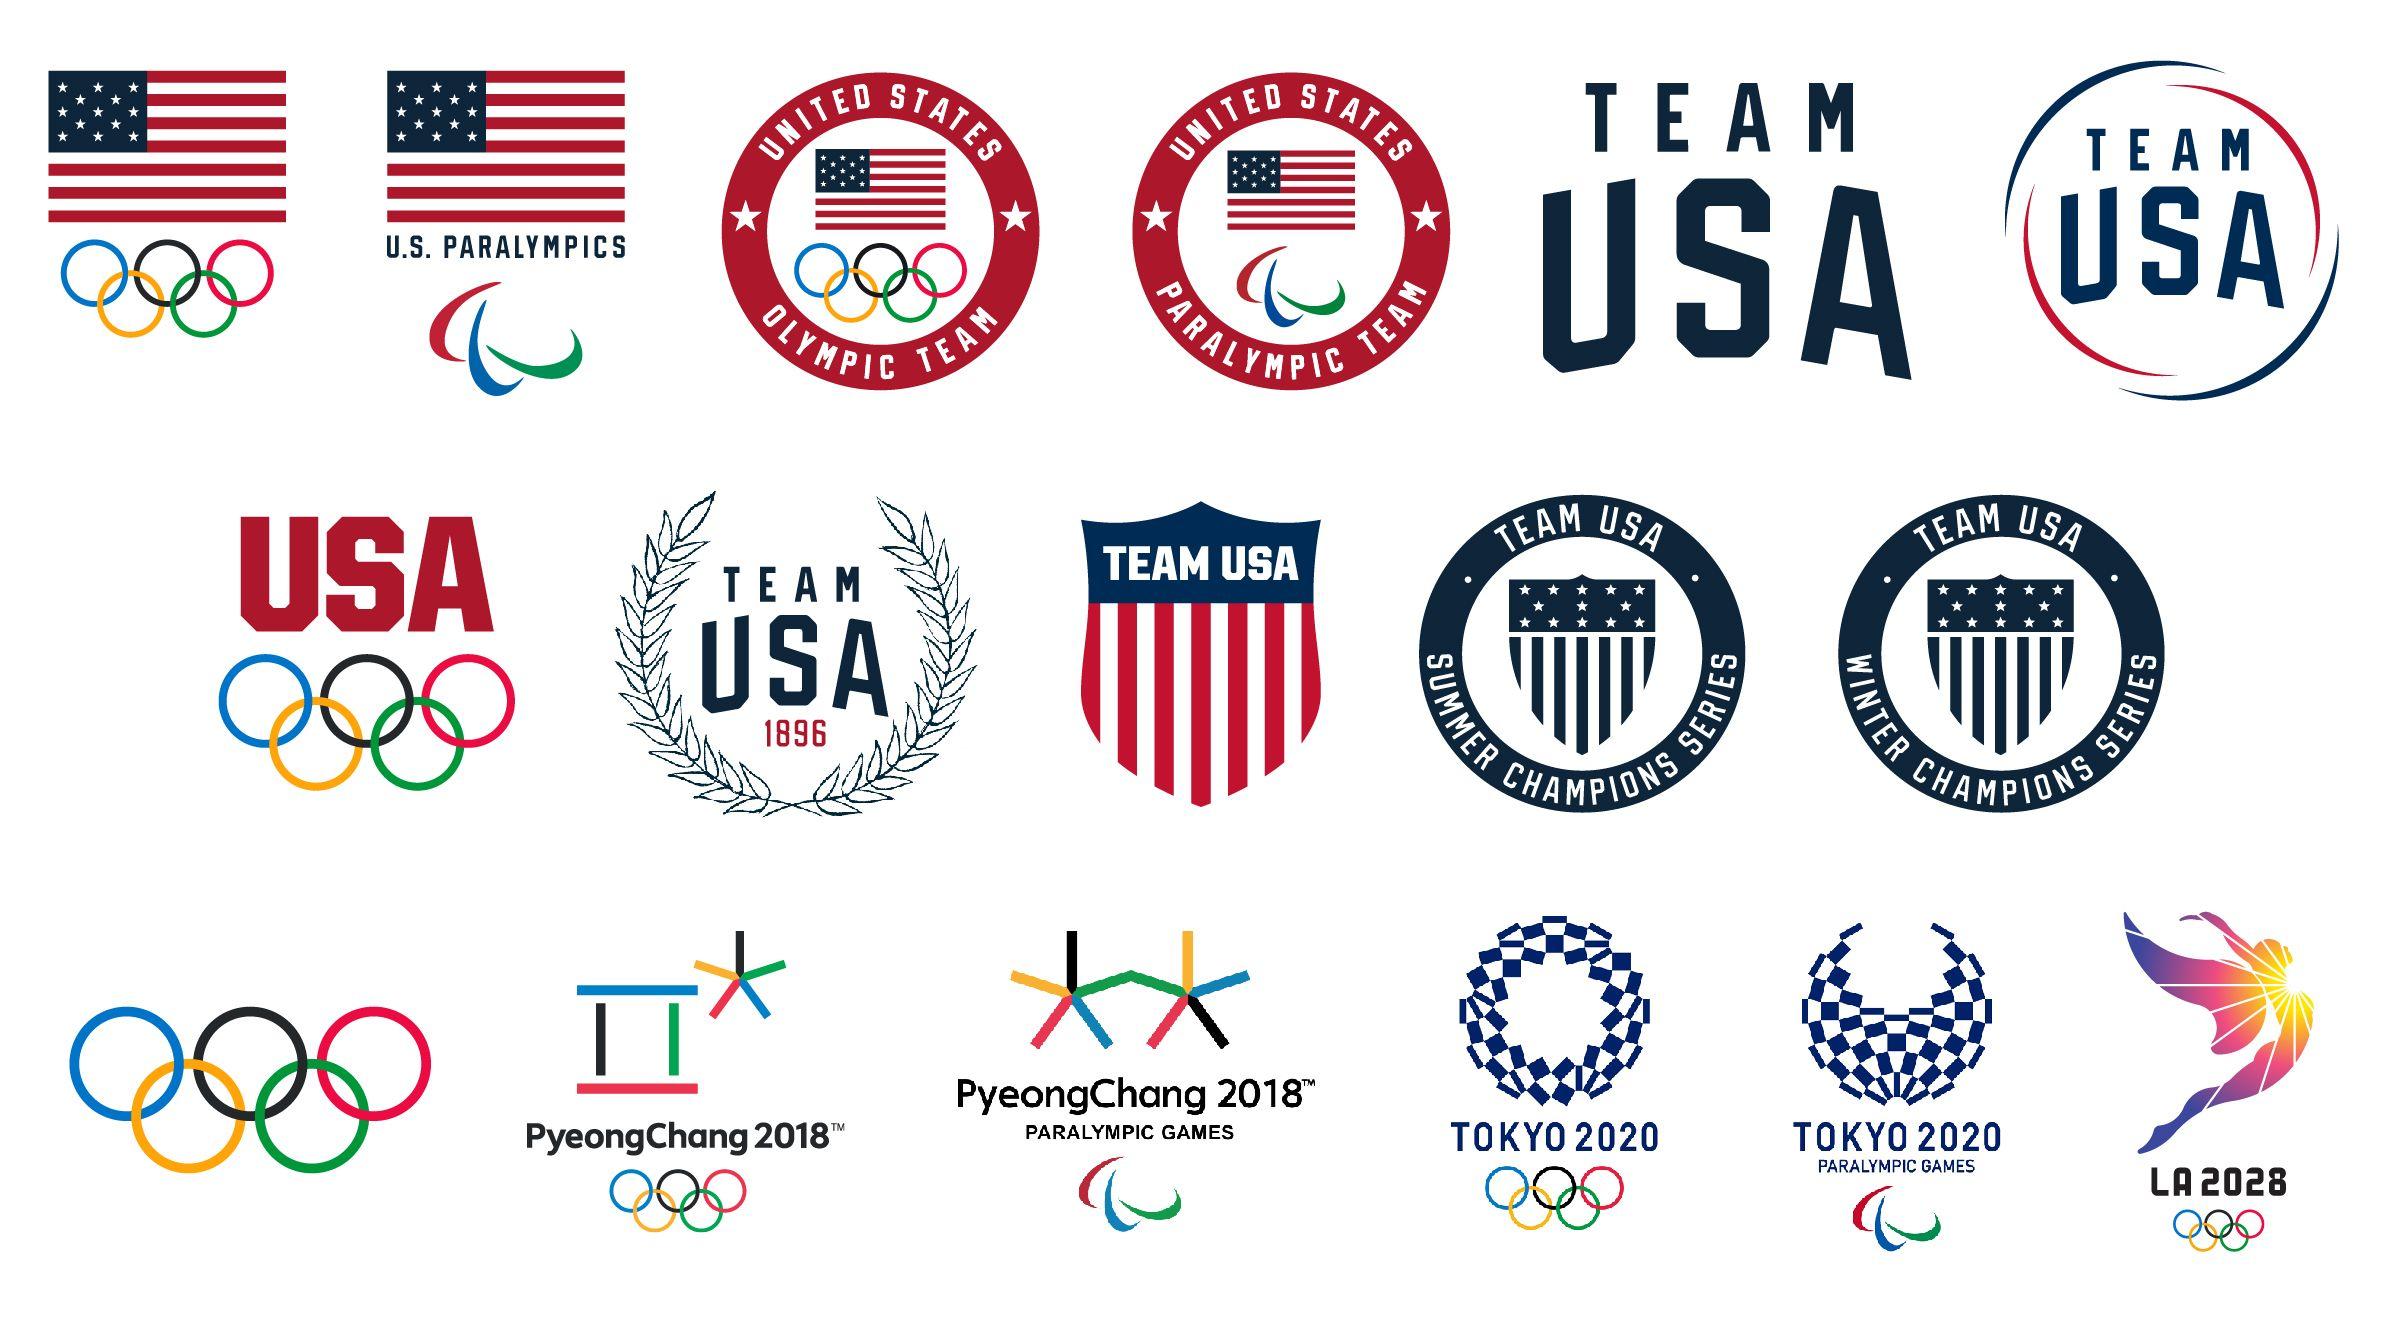 Olympic Circle Logo - Brand Usage Guidelines